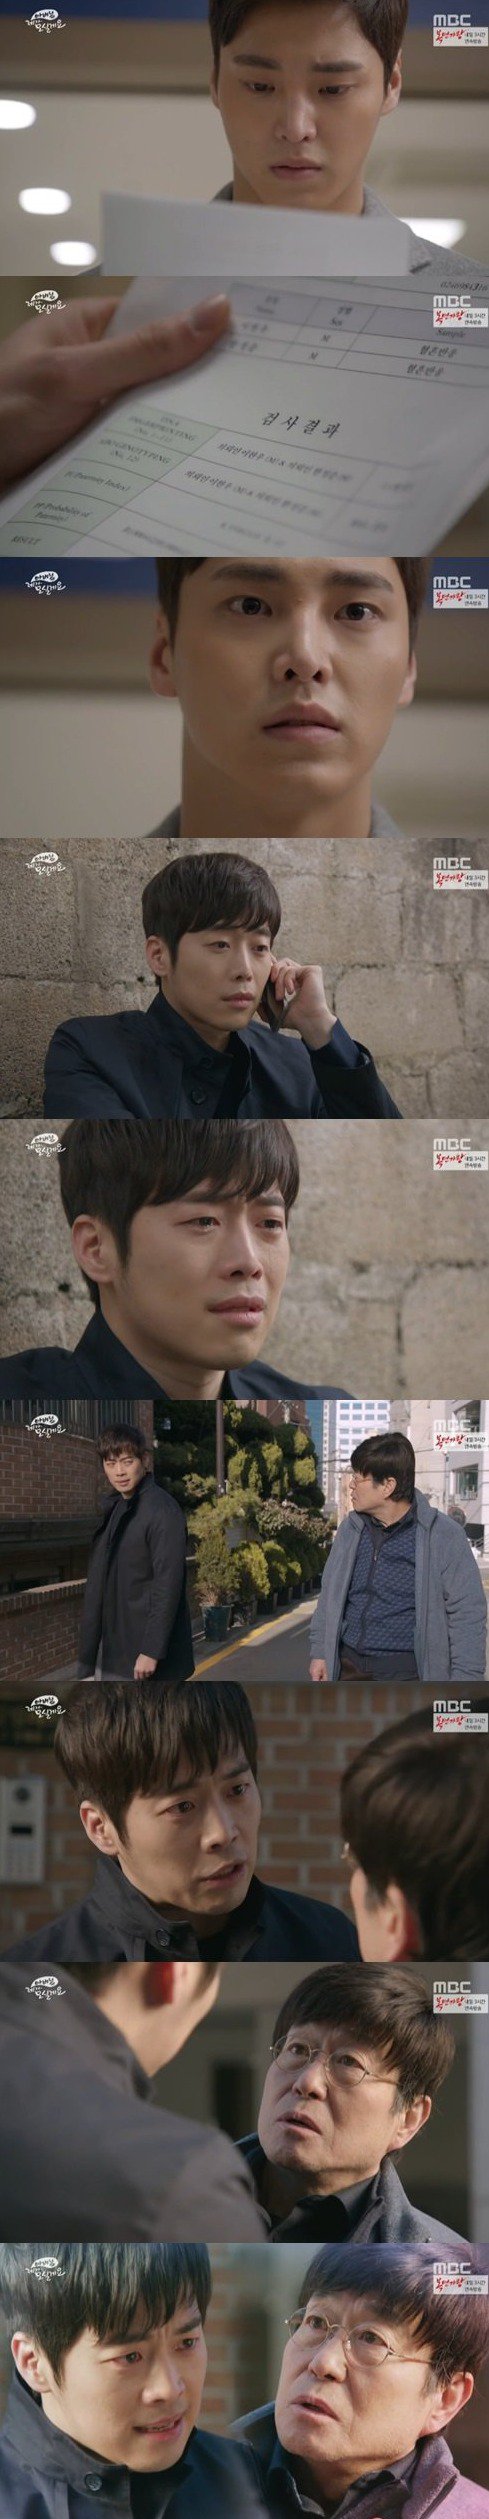 episodes 36 and 37 captures for the Korean drama 'Father, I'll Take Care of You'